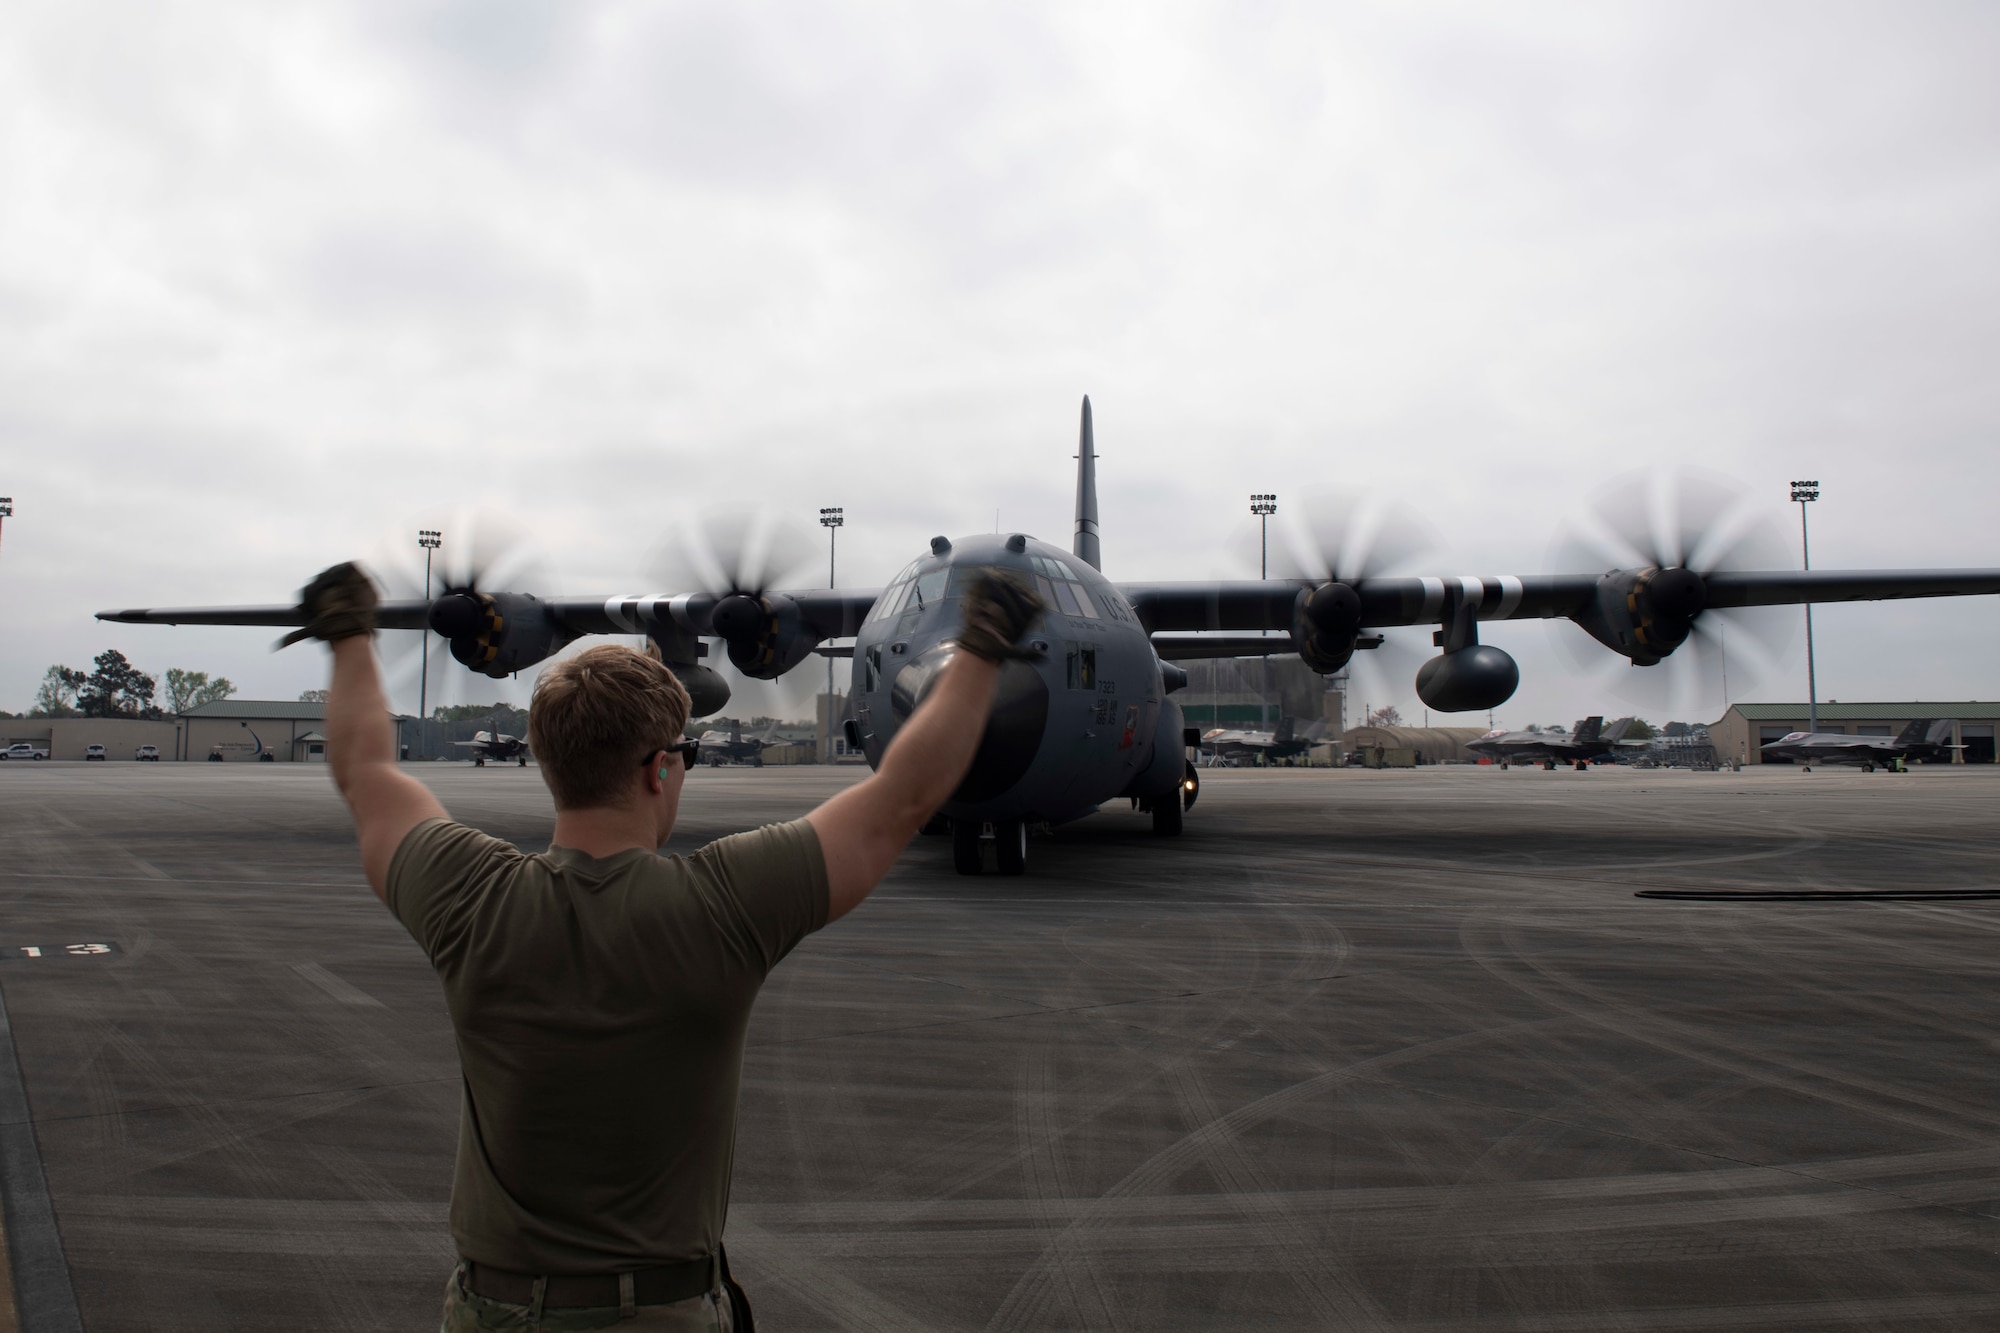 Staff Sgt. Brenden Swartz, 120th Airlift Squadron crew chief, directs a C-130H Hercules during Agile Flag 23-1, after landing at the Air Dominance Center, a combat readiness training center, in Savannah, Ga., March 1, 2023. During the exercise, the 120th AS supported agile combat employment concepts which require forces to rapidly insert into theaters, establish logistics and communications with theater command and control, receive follow-on forces, generate the mission, and project combat power across all domains, while making the critical decisions needed to remain agile. (U.S. Air Force photo by Tech. Sgt. Joshua Edwards)